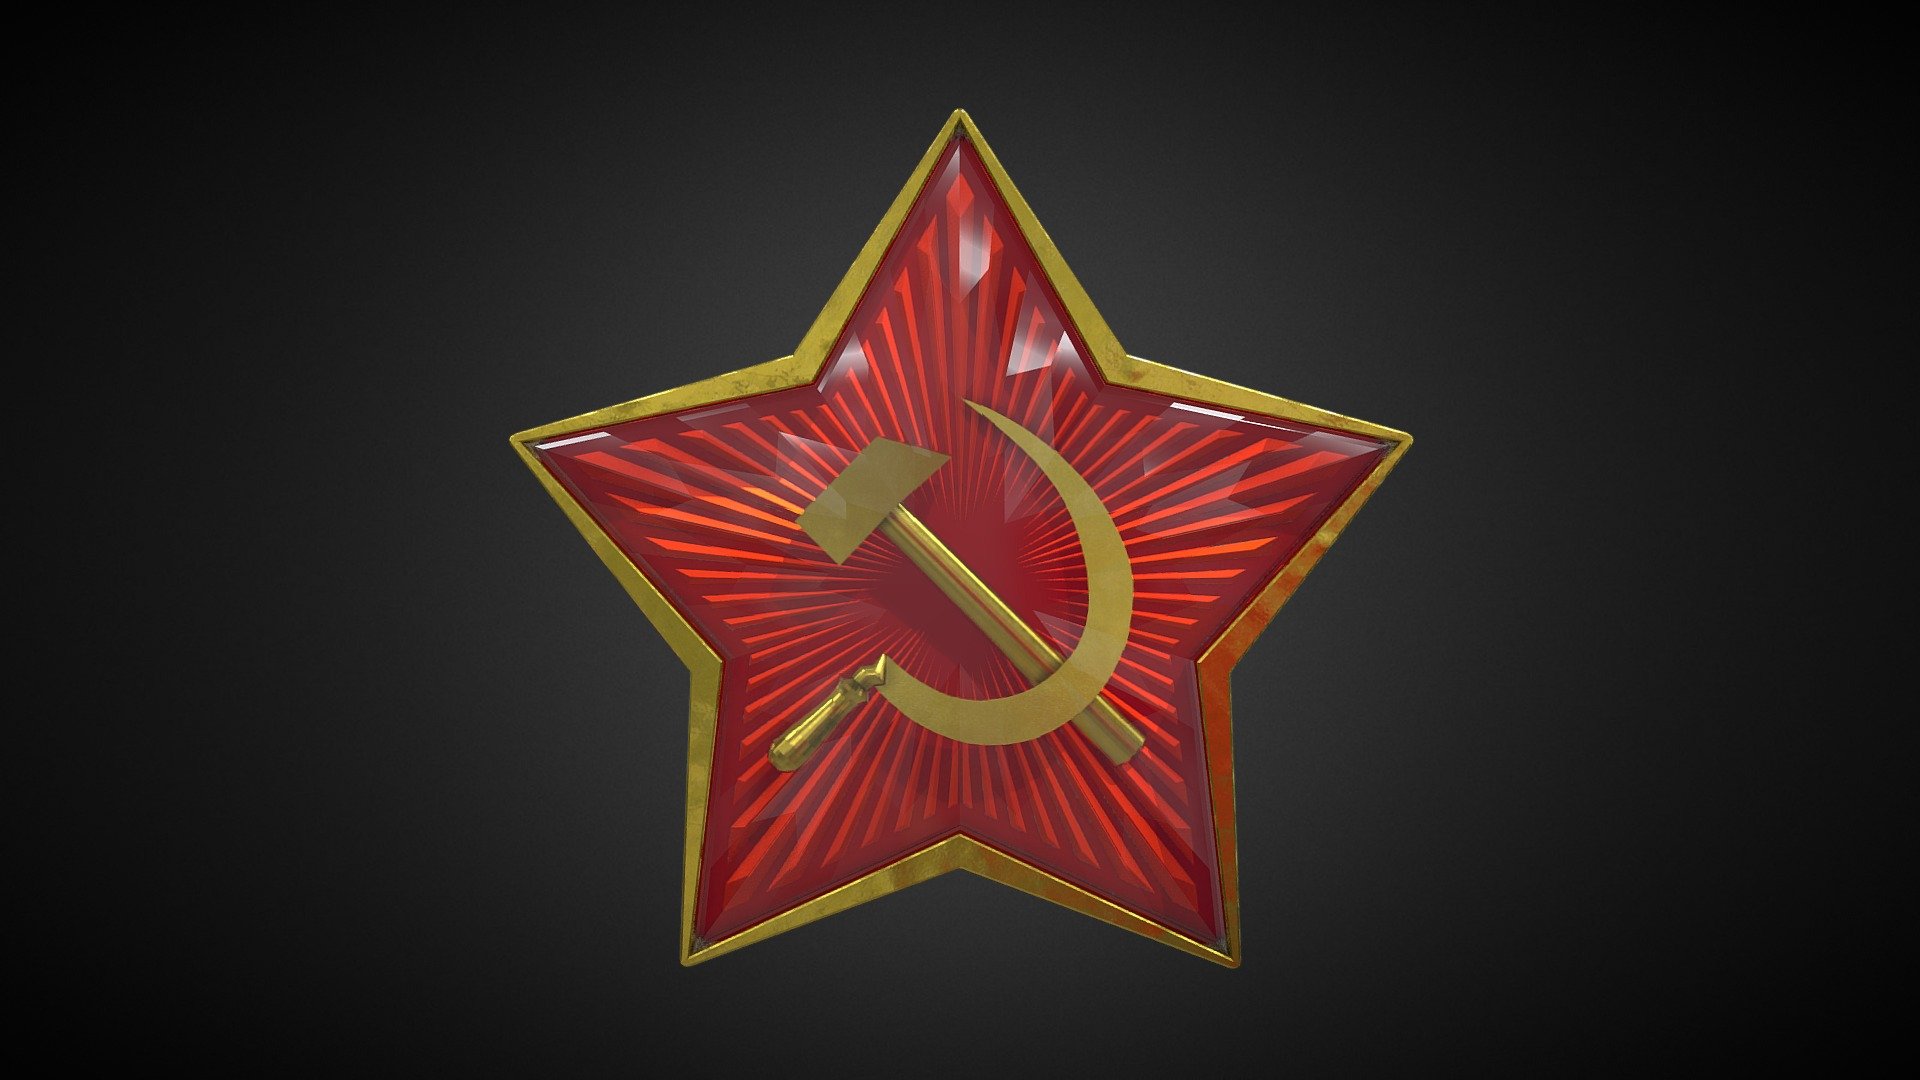 The USSR Logo made 3D.

This 3D model consists of 5 separate materials or objects. Each of them having their own separate texture files (PNG).




Hammer

Sickle

Star's Rays

Star Frame

Glass

PLEASE TAKE NOTE: The Glass effect post processing was done here in Sketchfab.

I do not promote communism 3d model